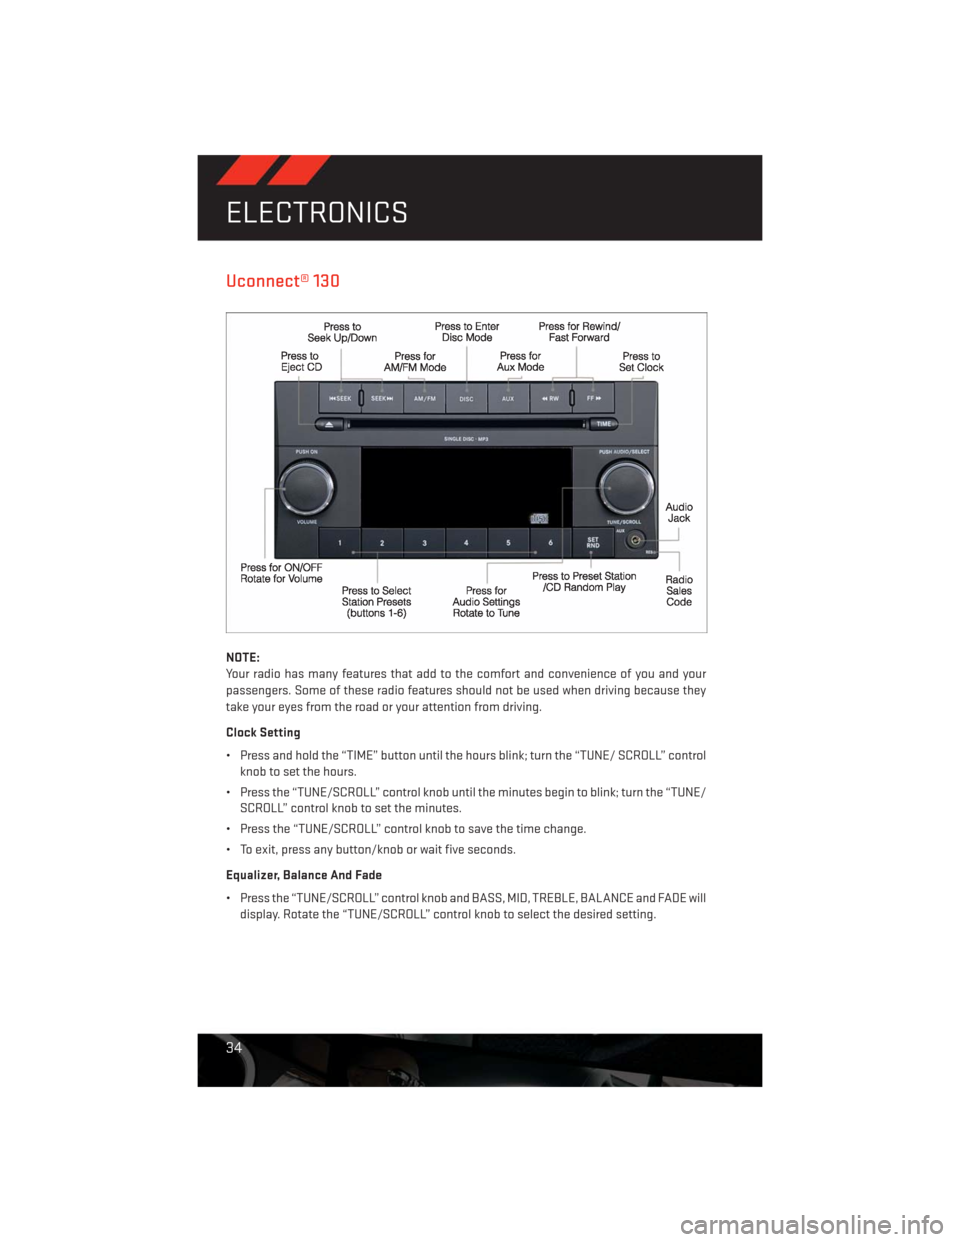 DODGE CHALLENGER 2013 3.G User Guide Uconnect® 130
NOTE:
Your radio has many features that add to the comfort and convenience of you and your
passengers. Some of these radio features should not be used when driving because they
take you